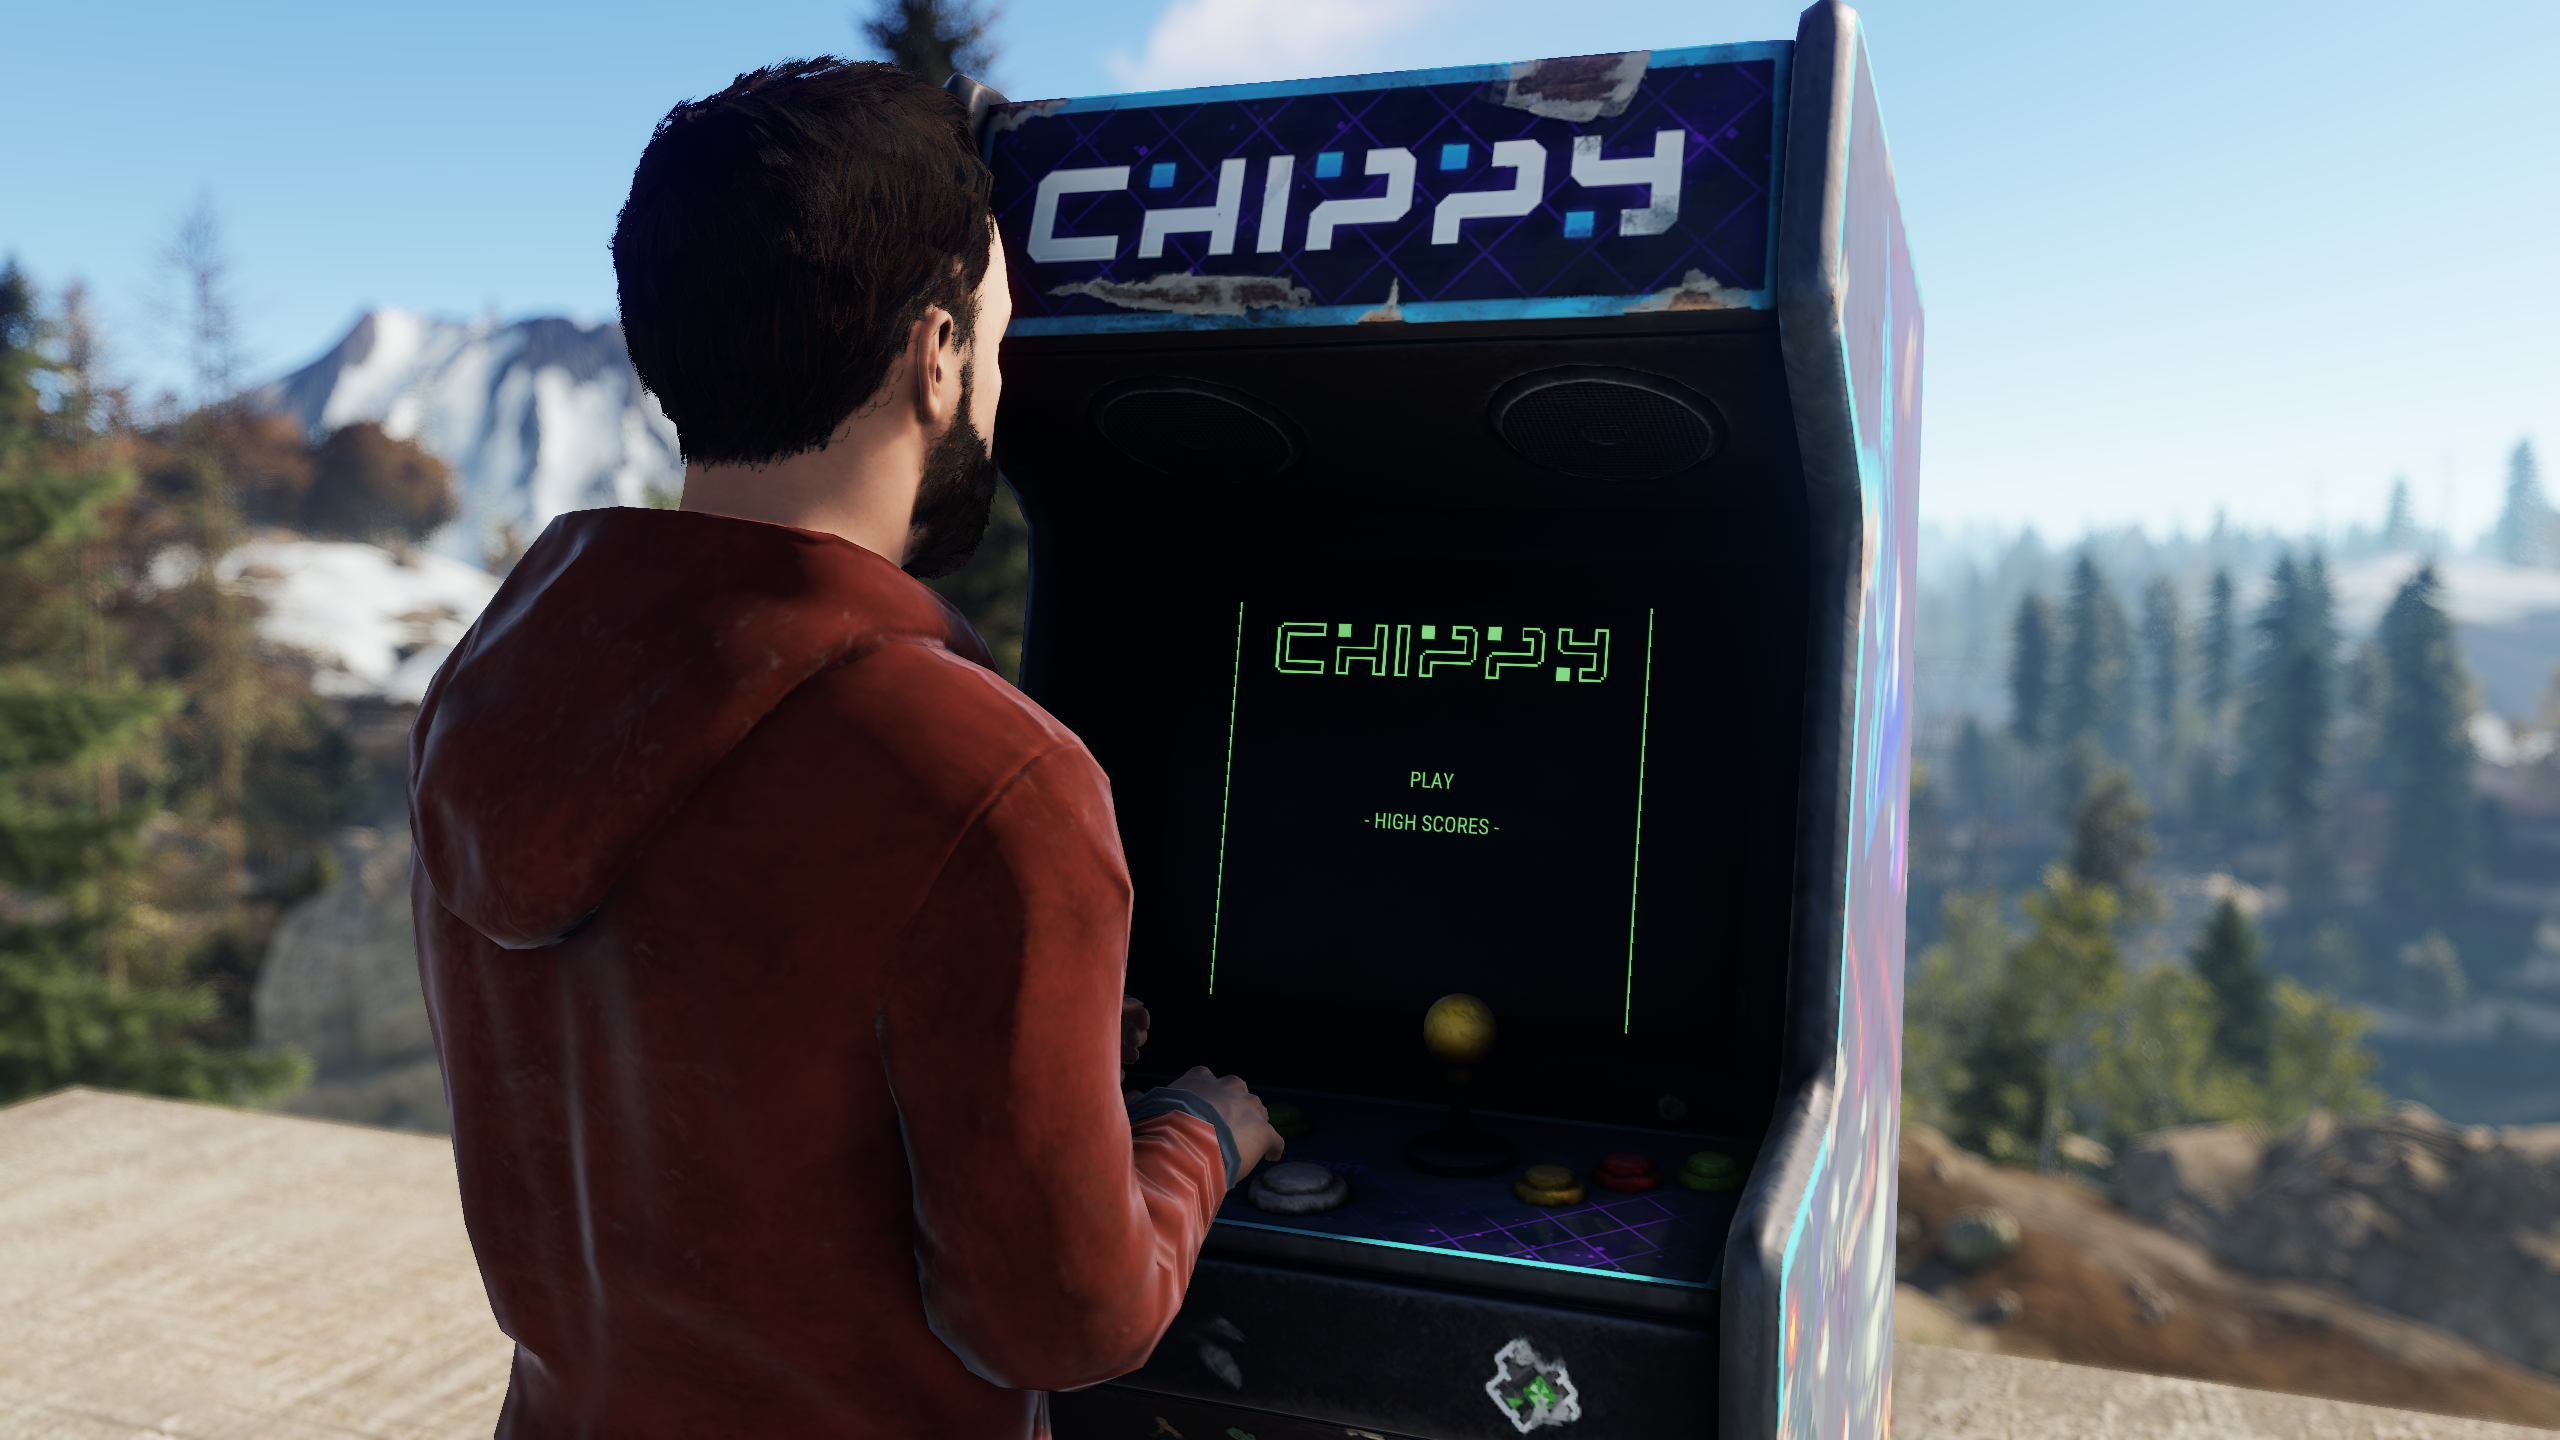 Chippy_Arcade_3.png